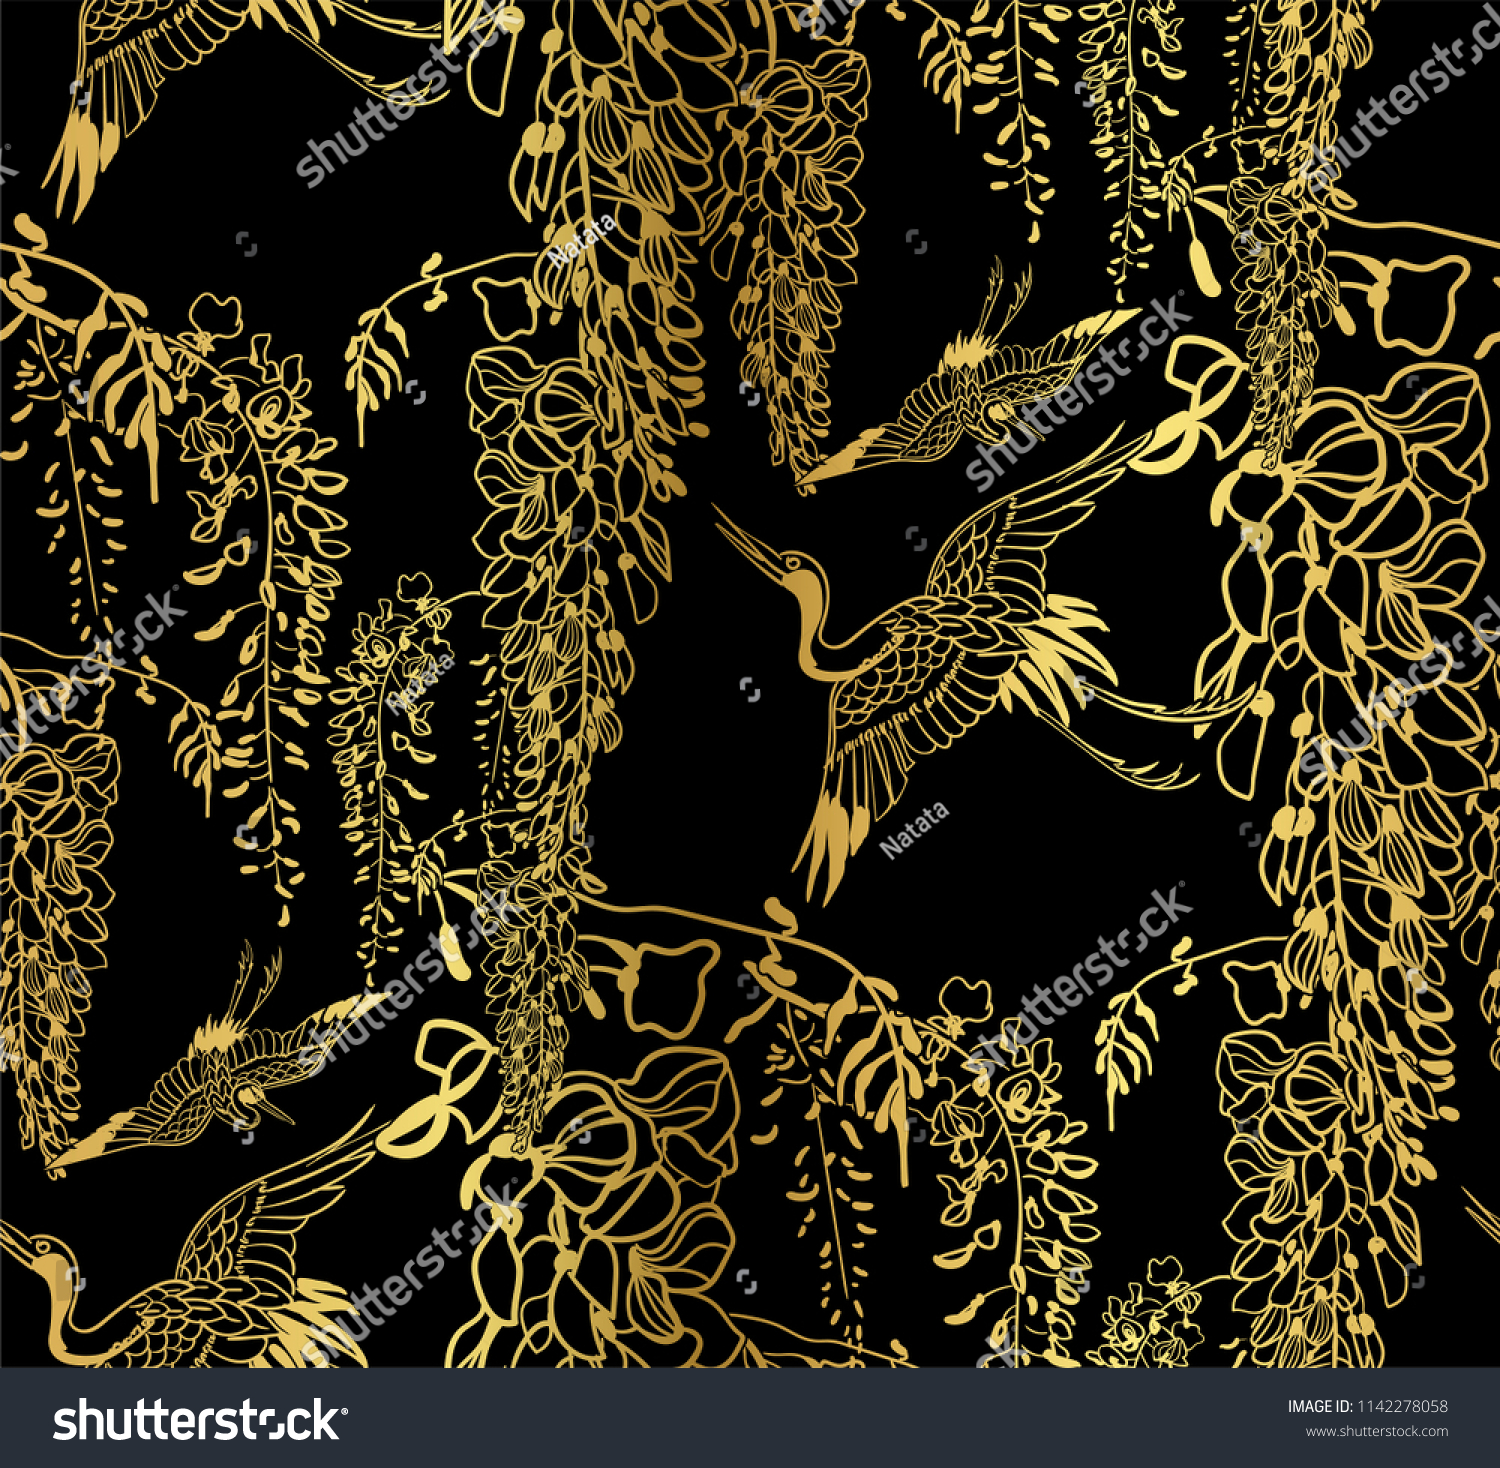 SVG of cran bird wisteria vector seamless japanese chinese pattern gold black traditional svg